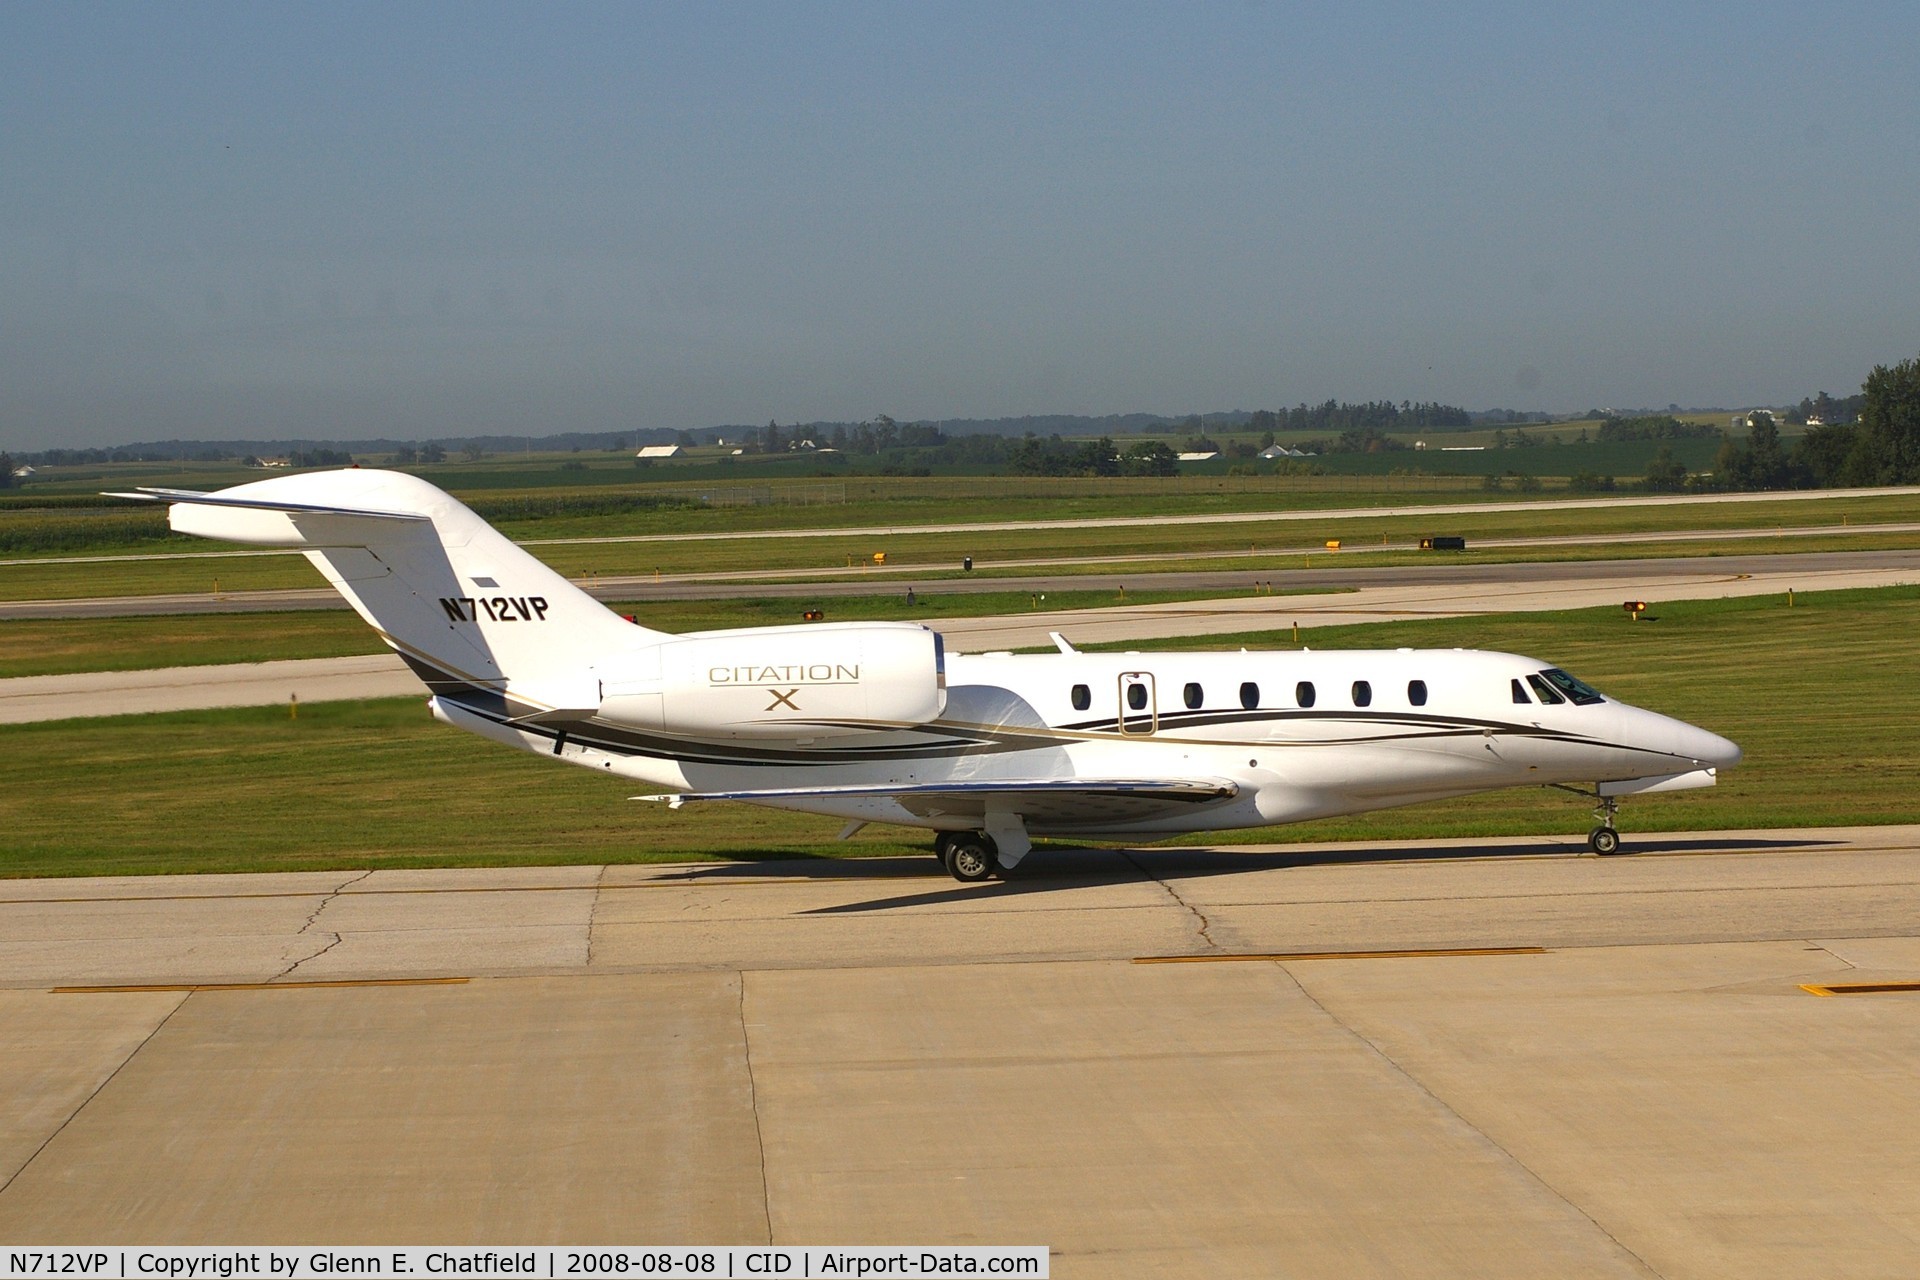 N712VP, 1997 Cessna 750 Citation X Citation X C/N 750-0012, Taxiing on Delta on the way to Rockwell-Collins